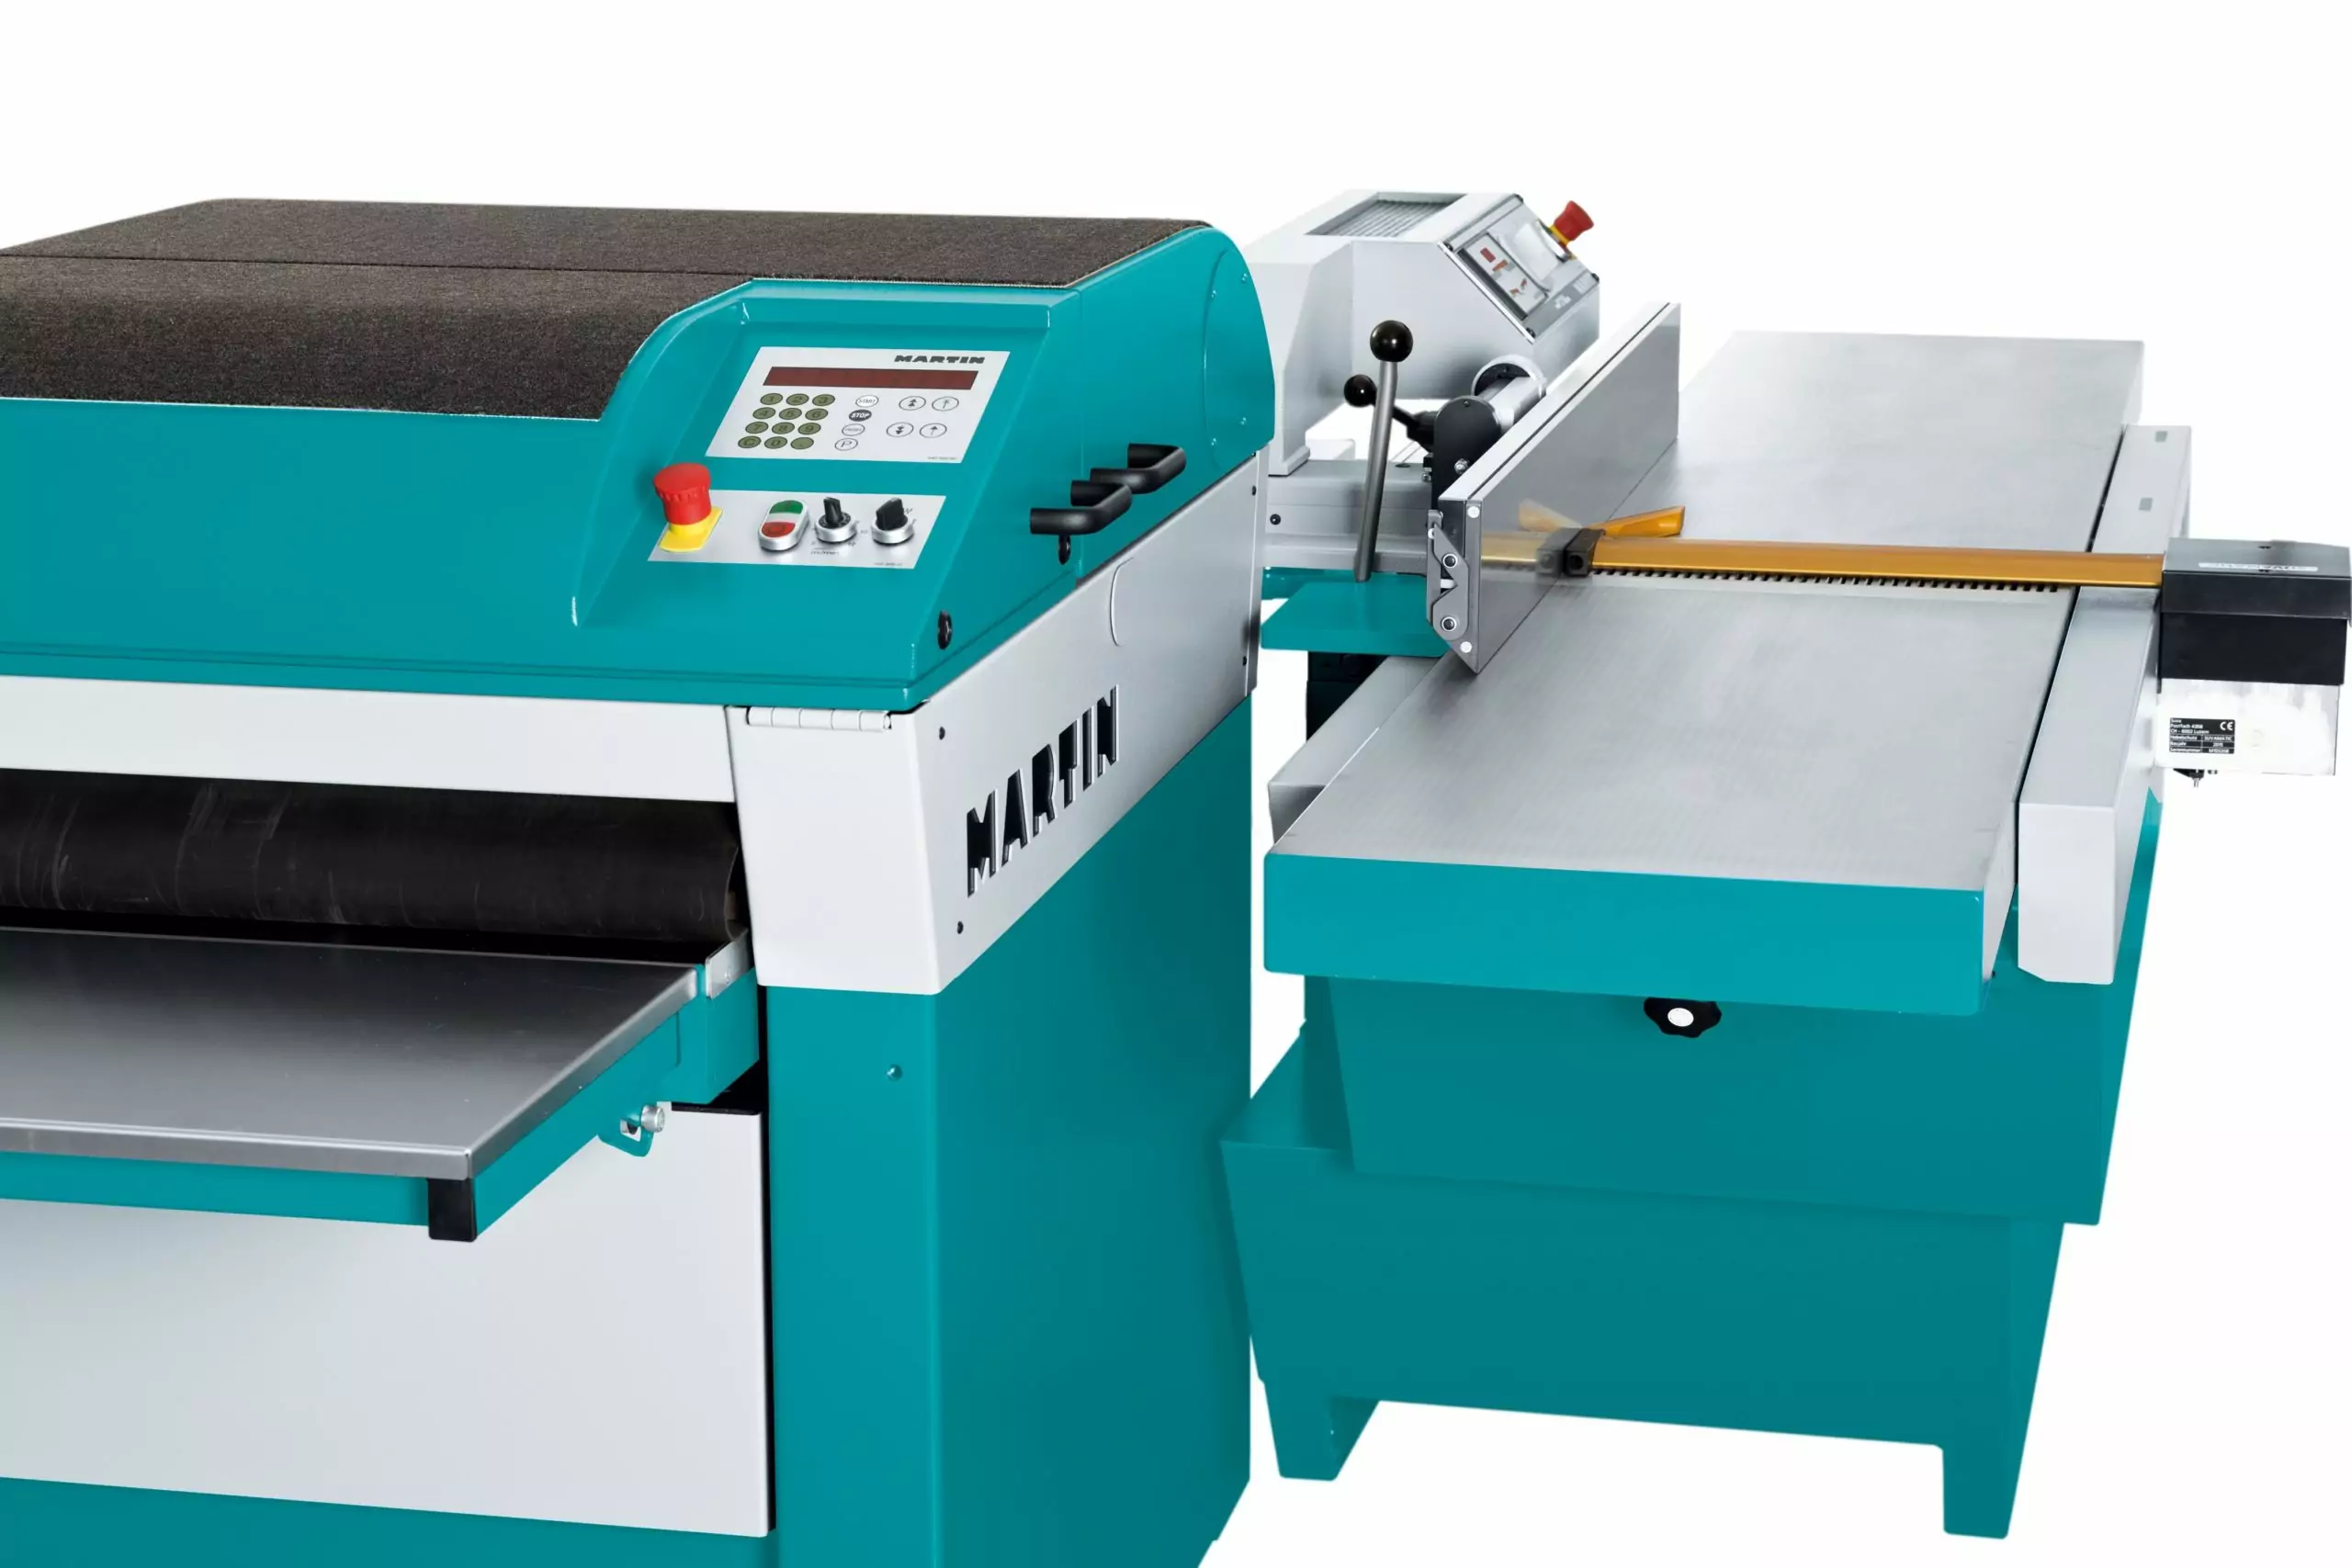 Martin T54 Surface Planer & Martin T45 Thicknesser on a white canvas